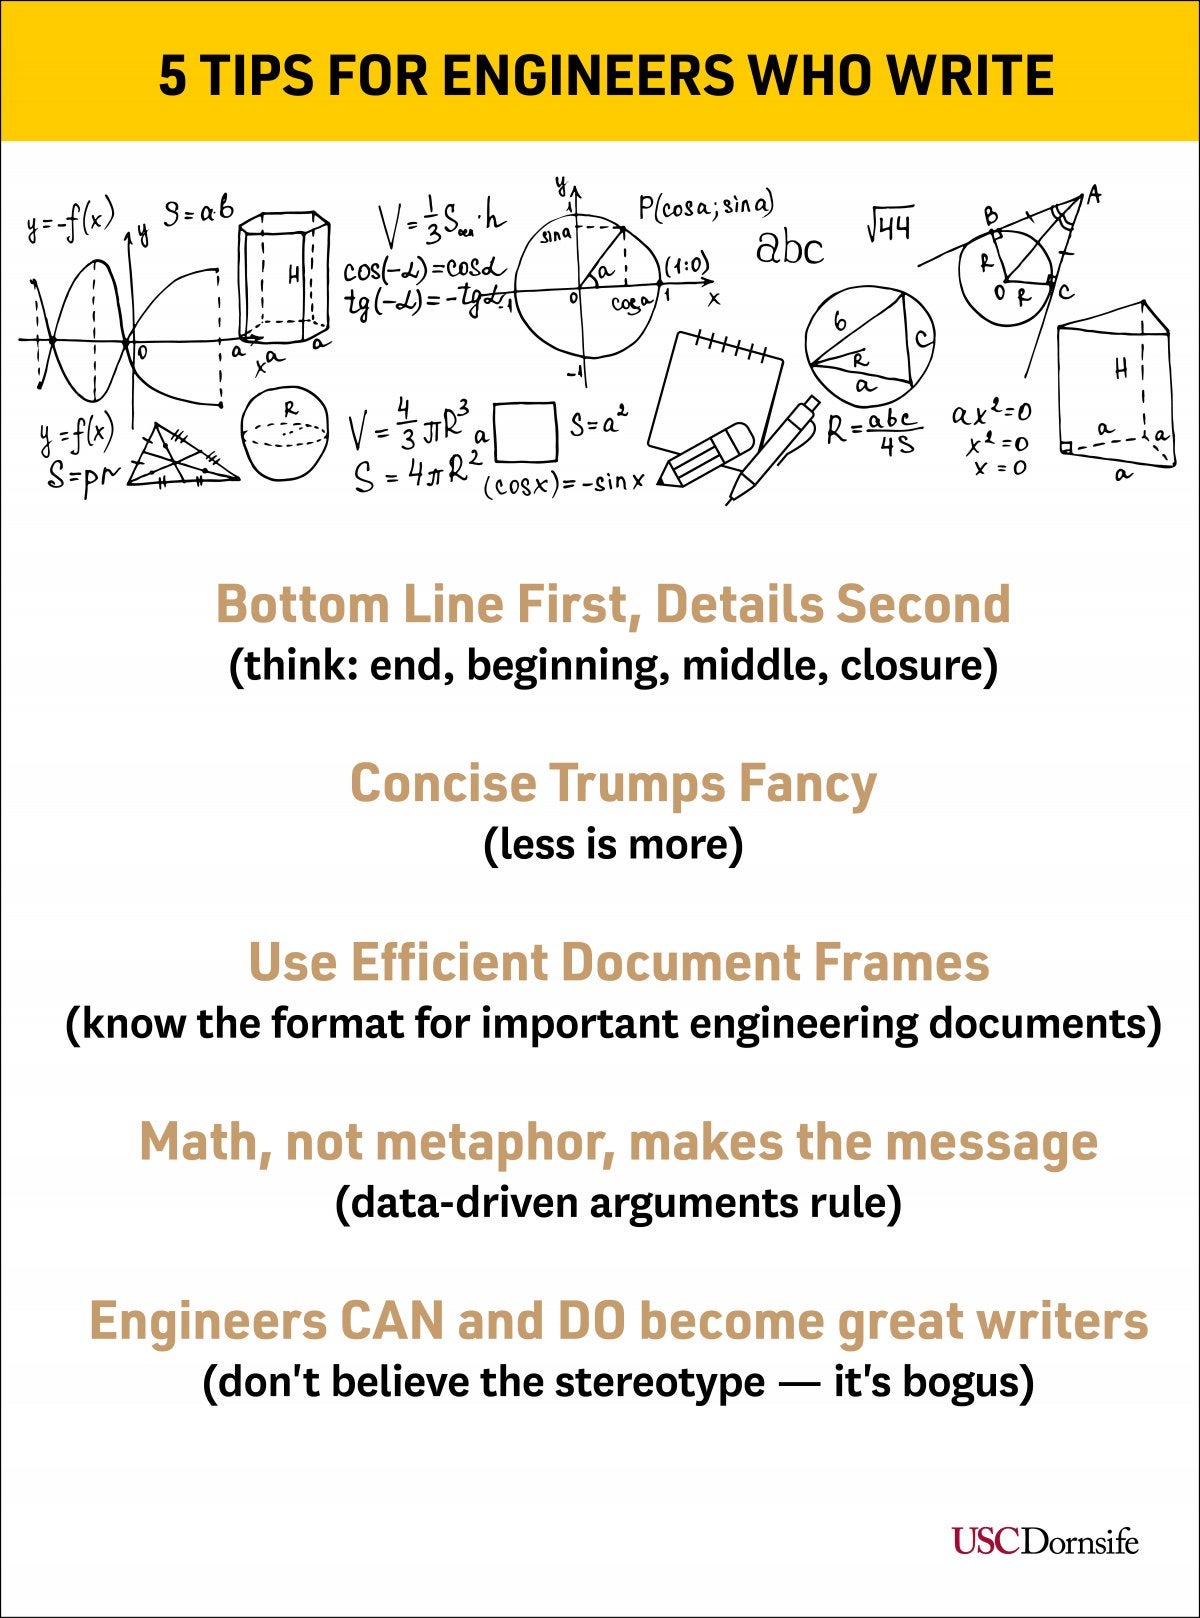 List of writing tips for engineers